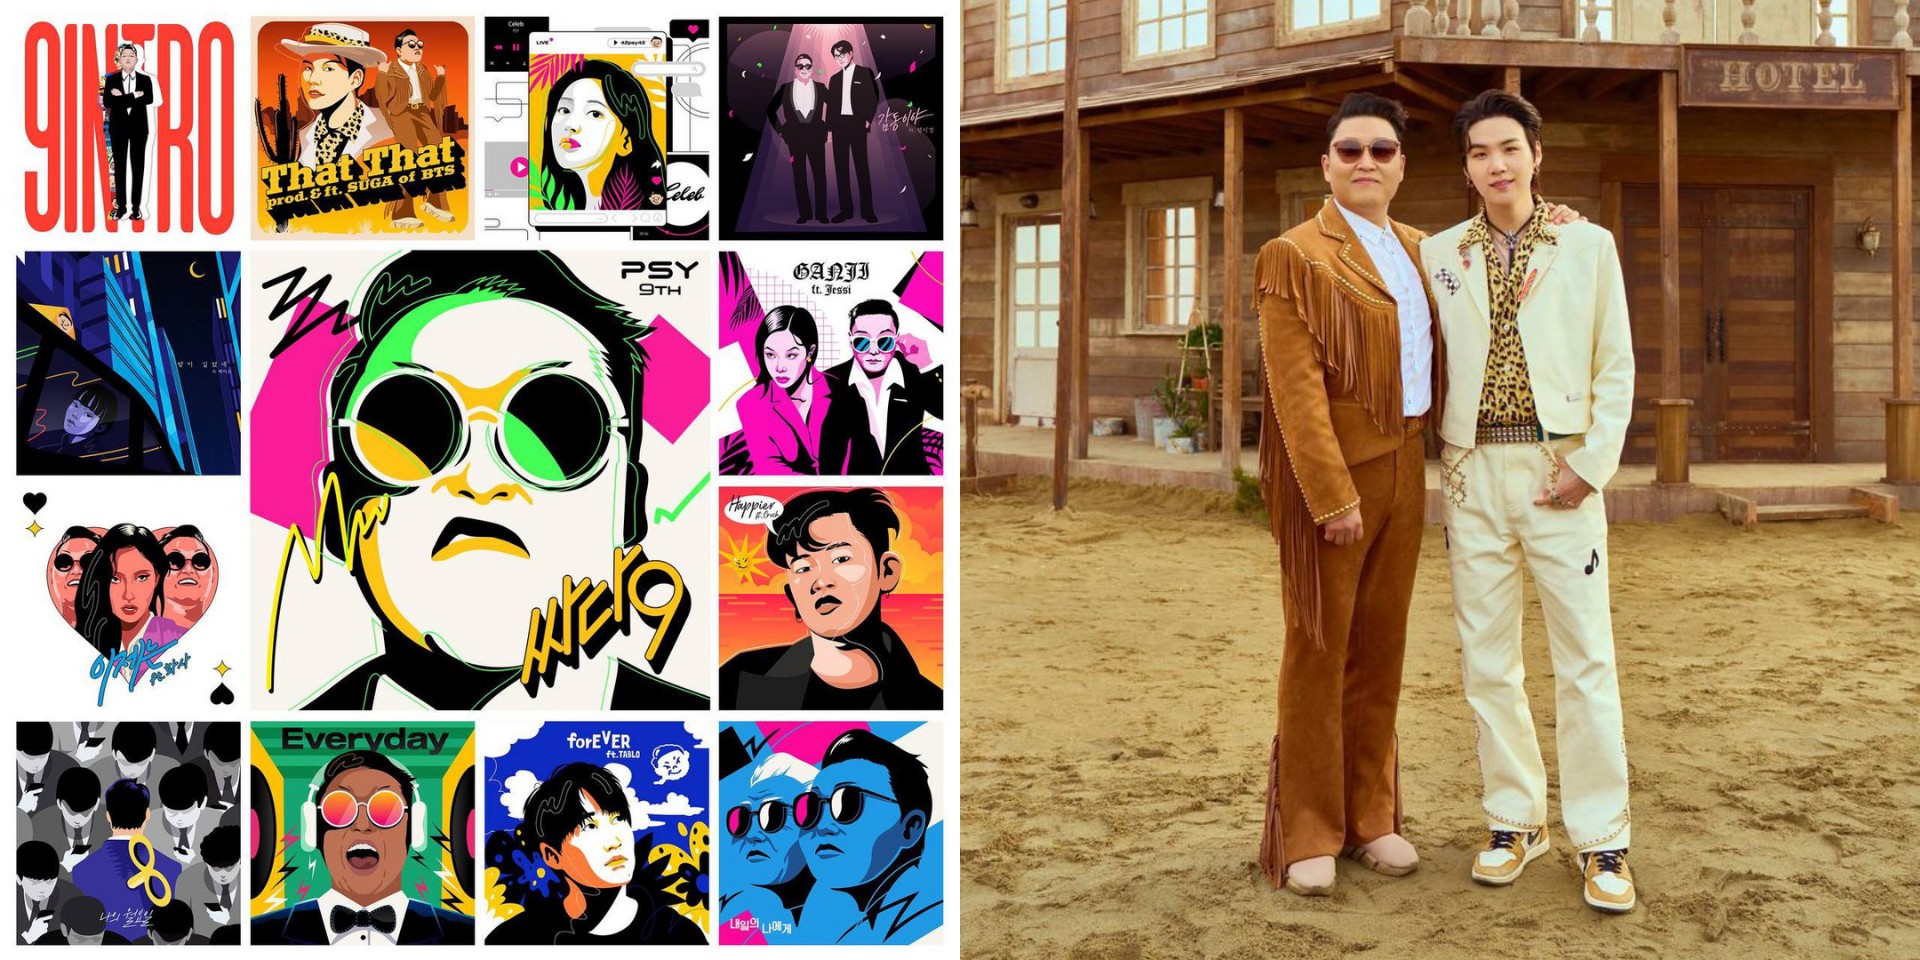 PSY returns with new album 'PSY 9th,' unleashes 'That That' featuring and produced by BTS' SUGA